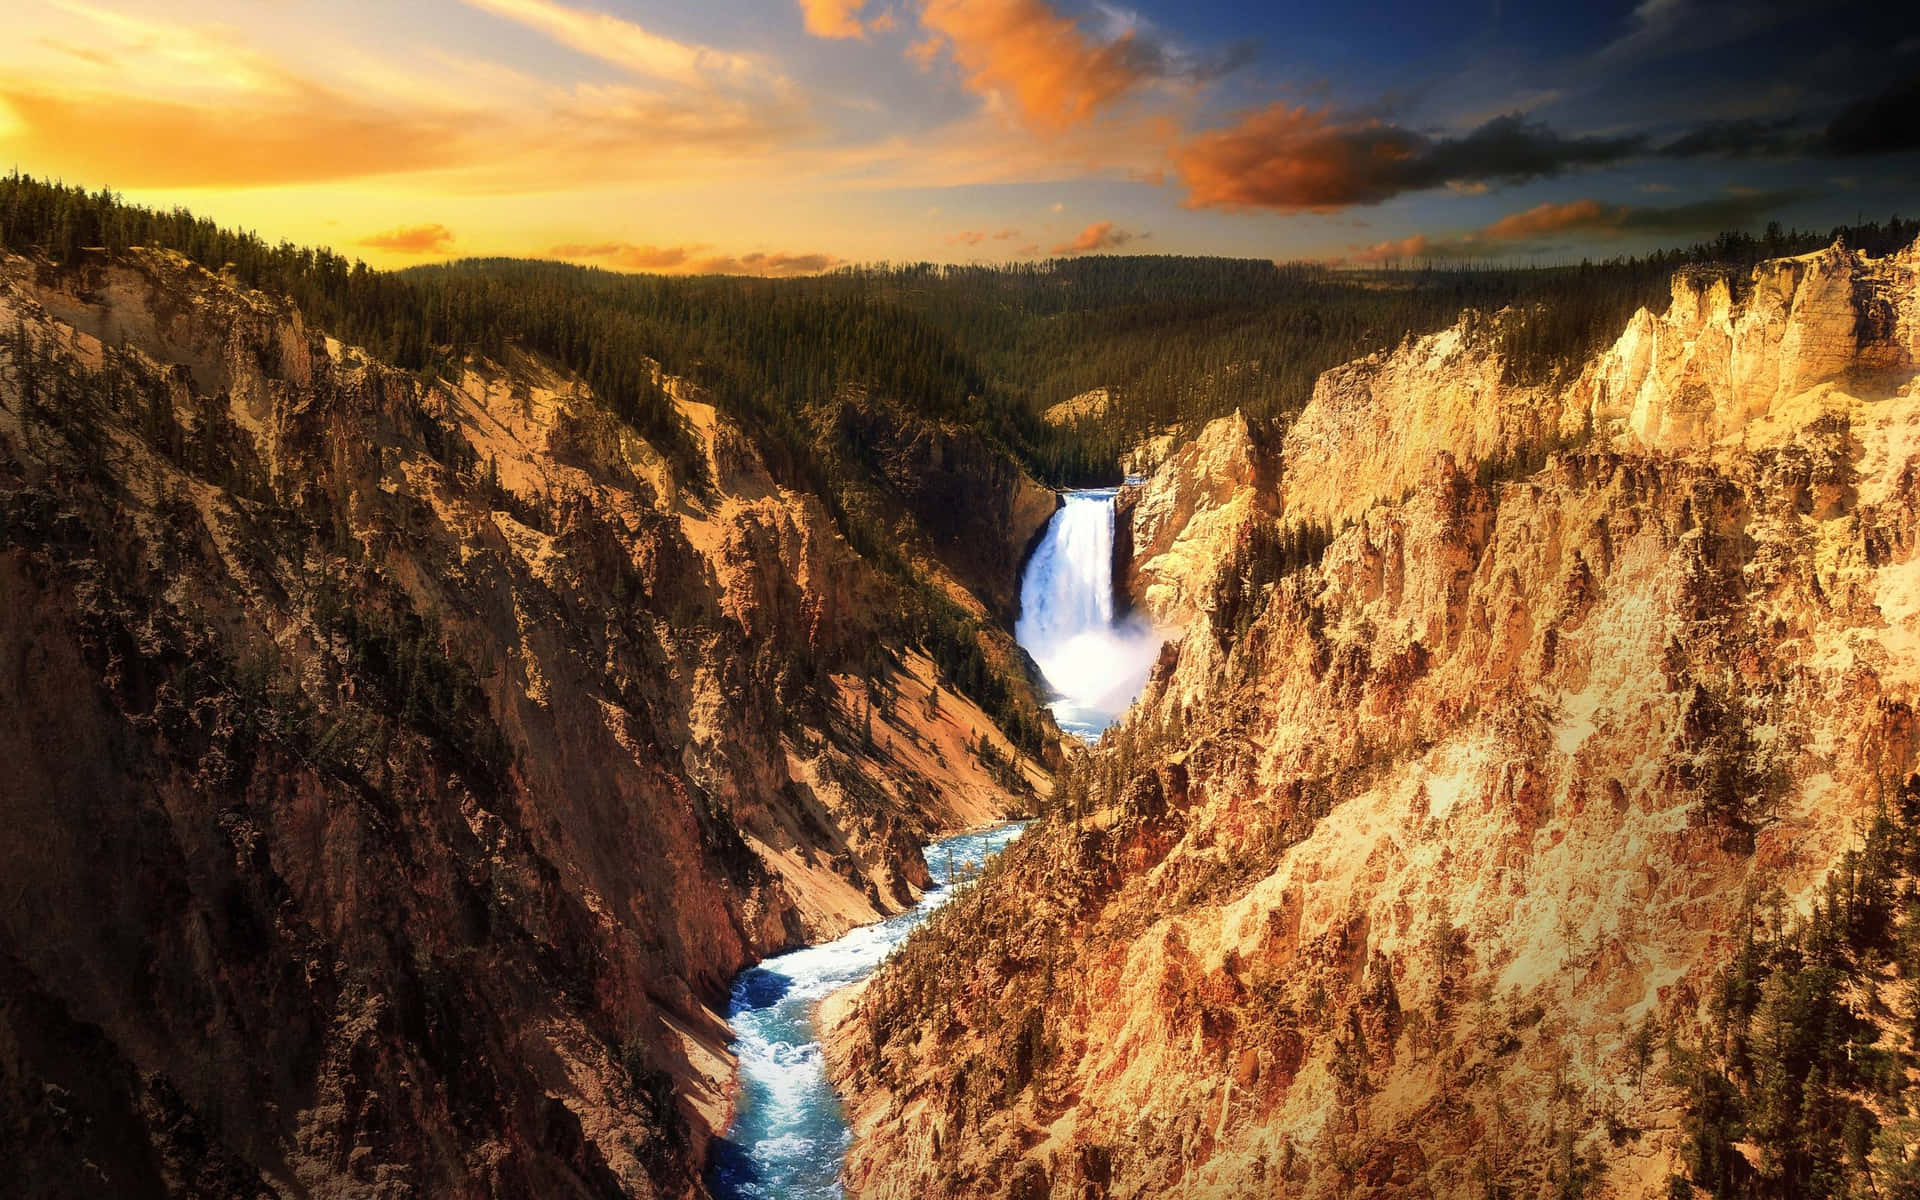 "Spectacular view of bear canyons in Yellowstone National Park" Wallpaper